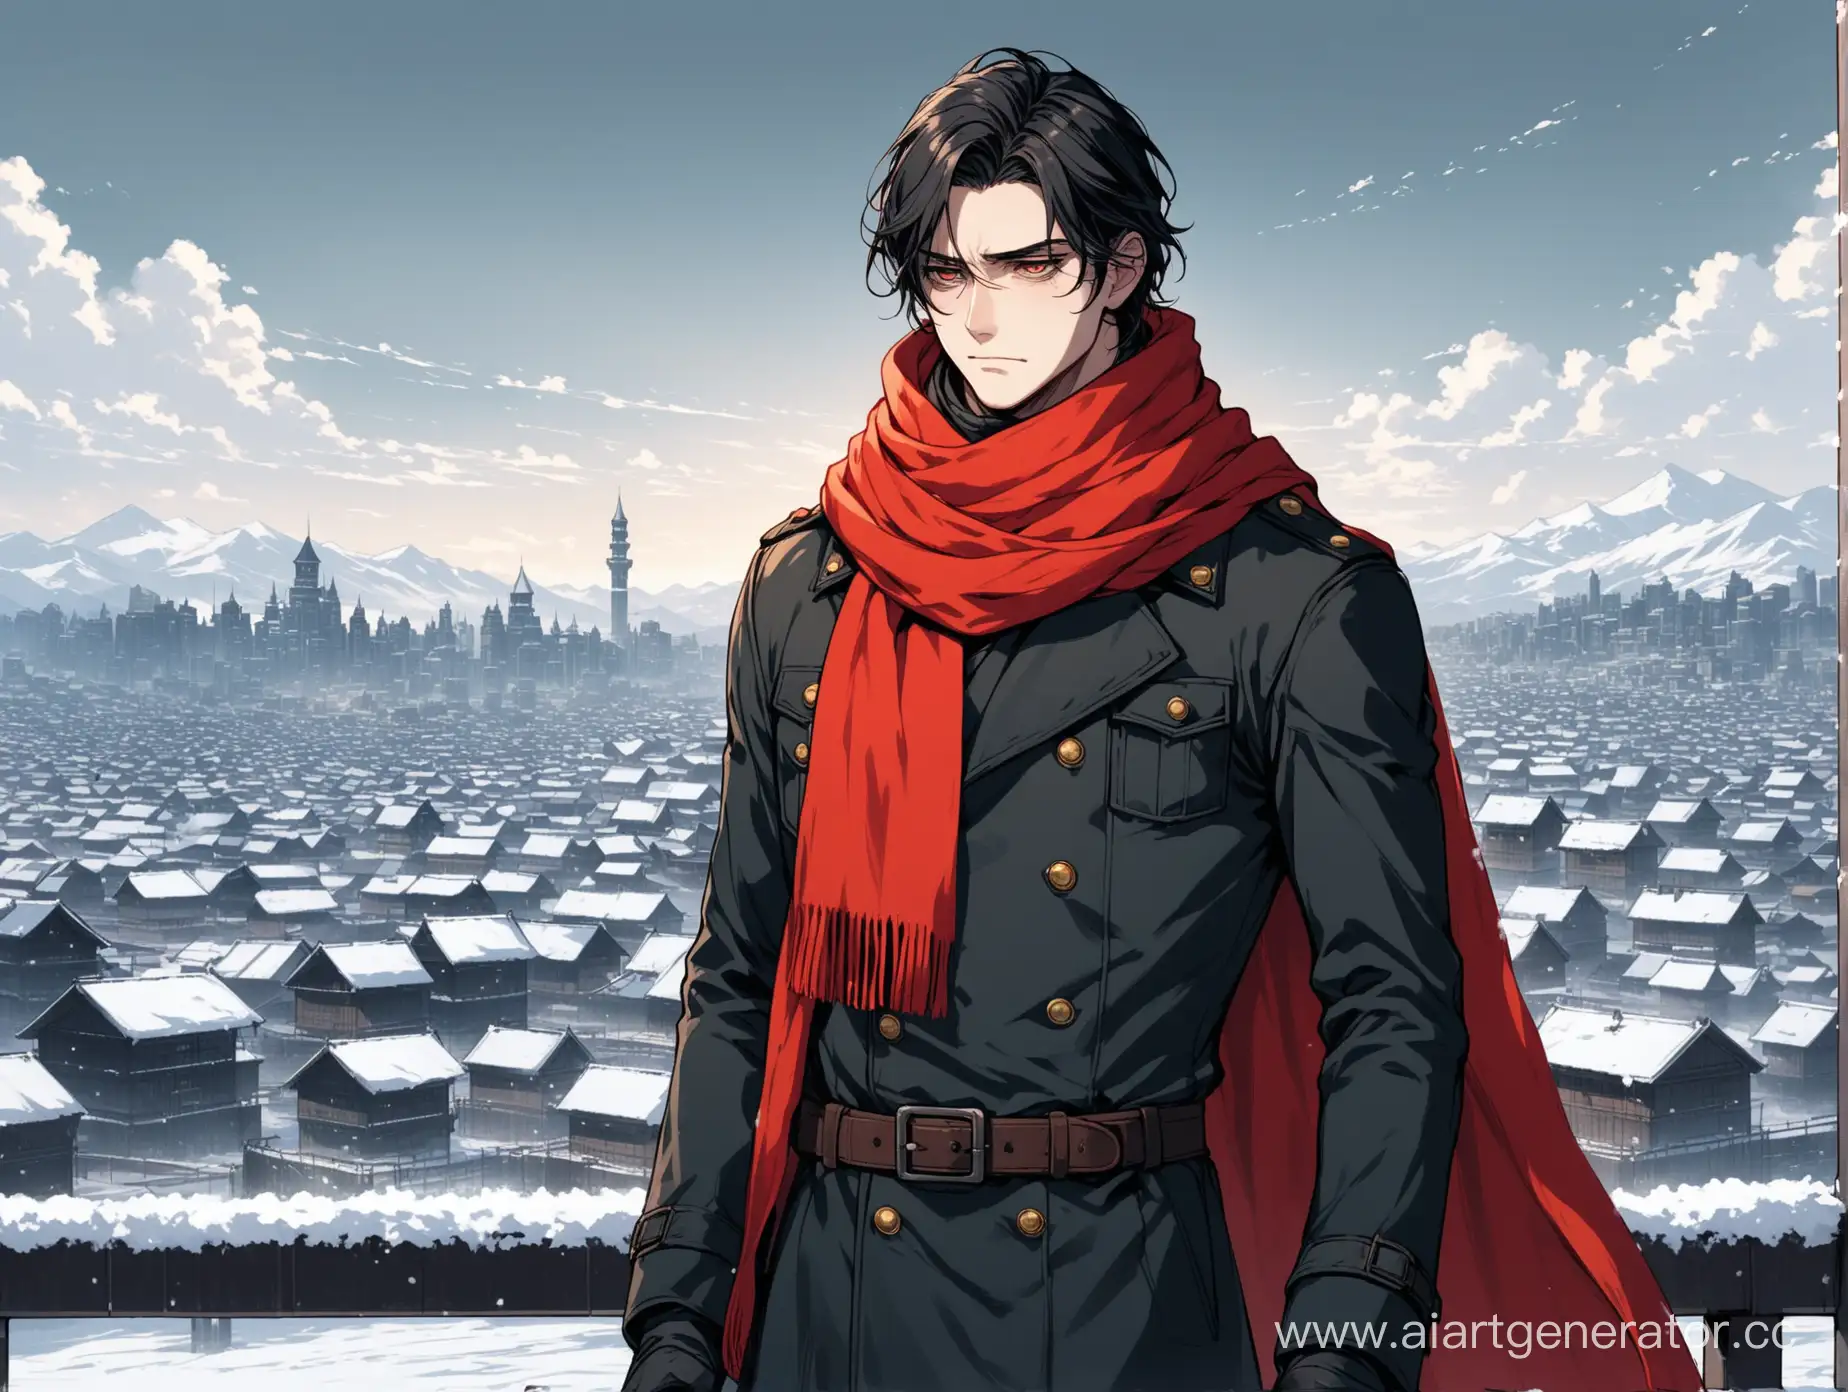 Male, handsome body, background of the city of Winterhom, wearing a meter-long red scarf, winter clothes, General wears a sword on his belt, always sad, bags under the eyes